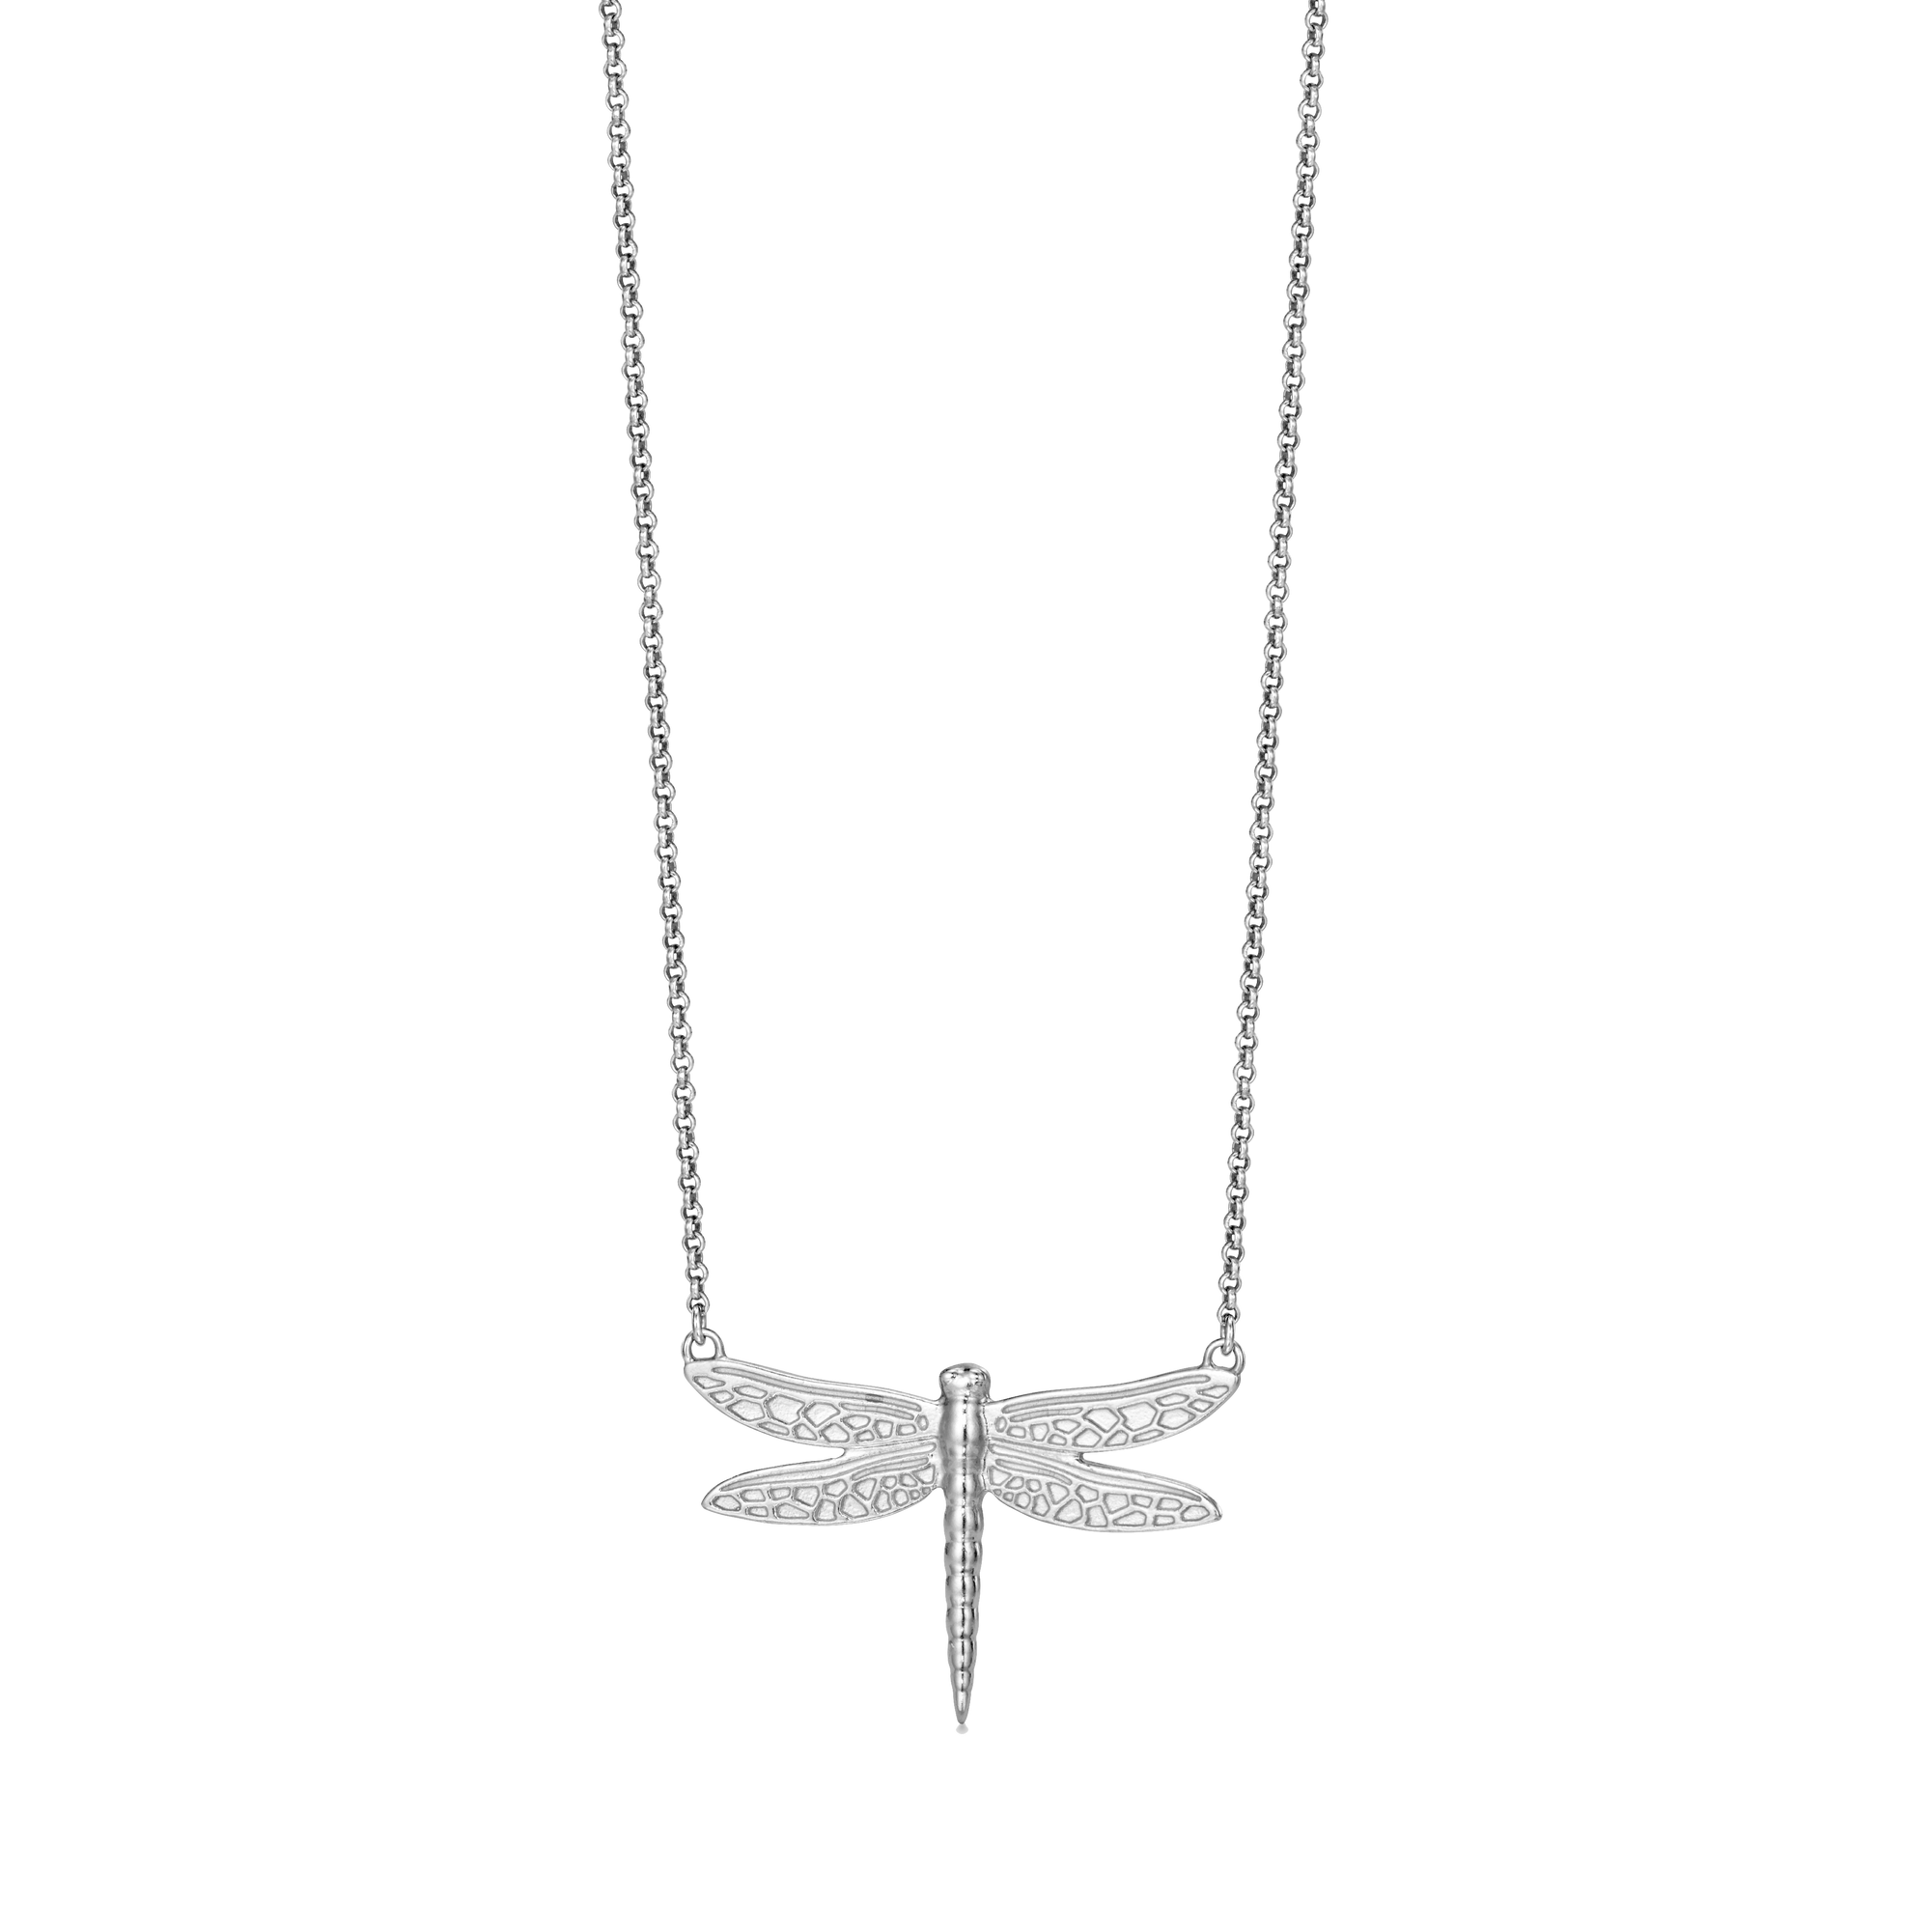 Dragonfly Necklace - Large